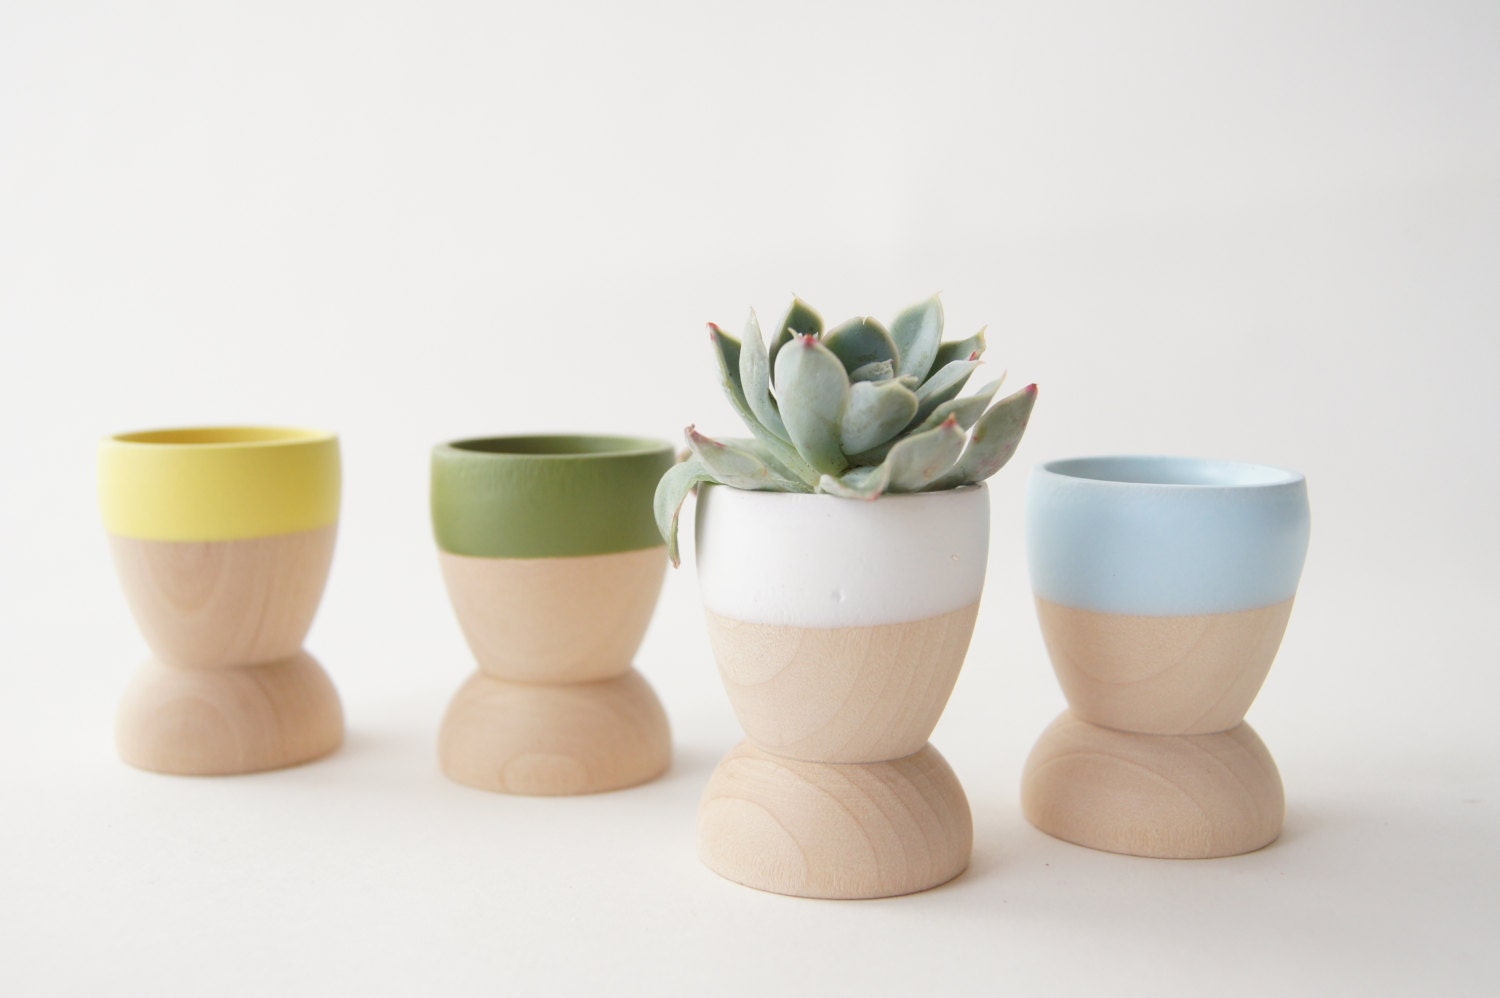 Mini Planters set of 4, Blue, Green, Yellow and White, Natural Wedding, Spring Decor - WindandWillowHome